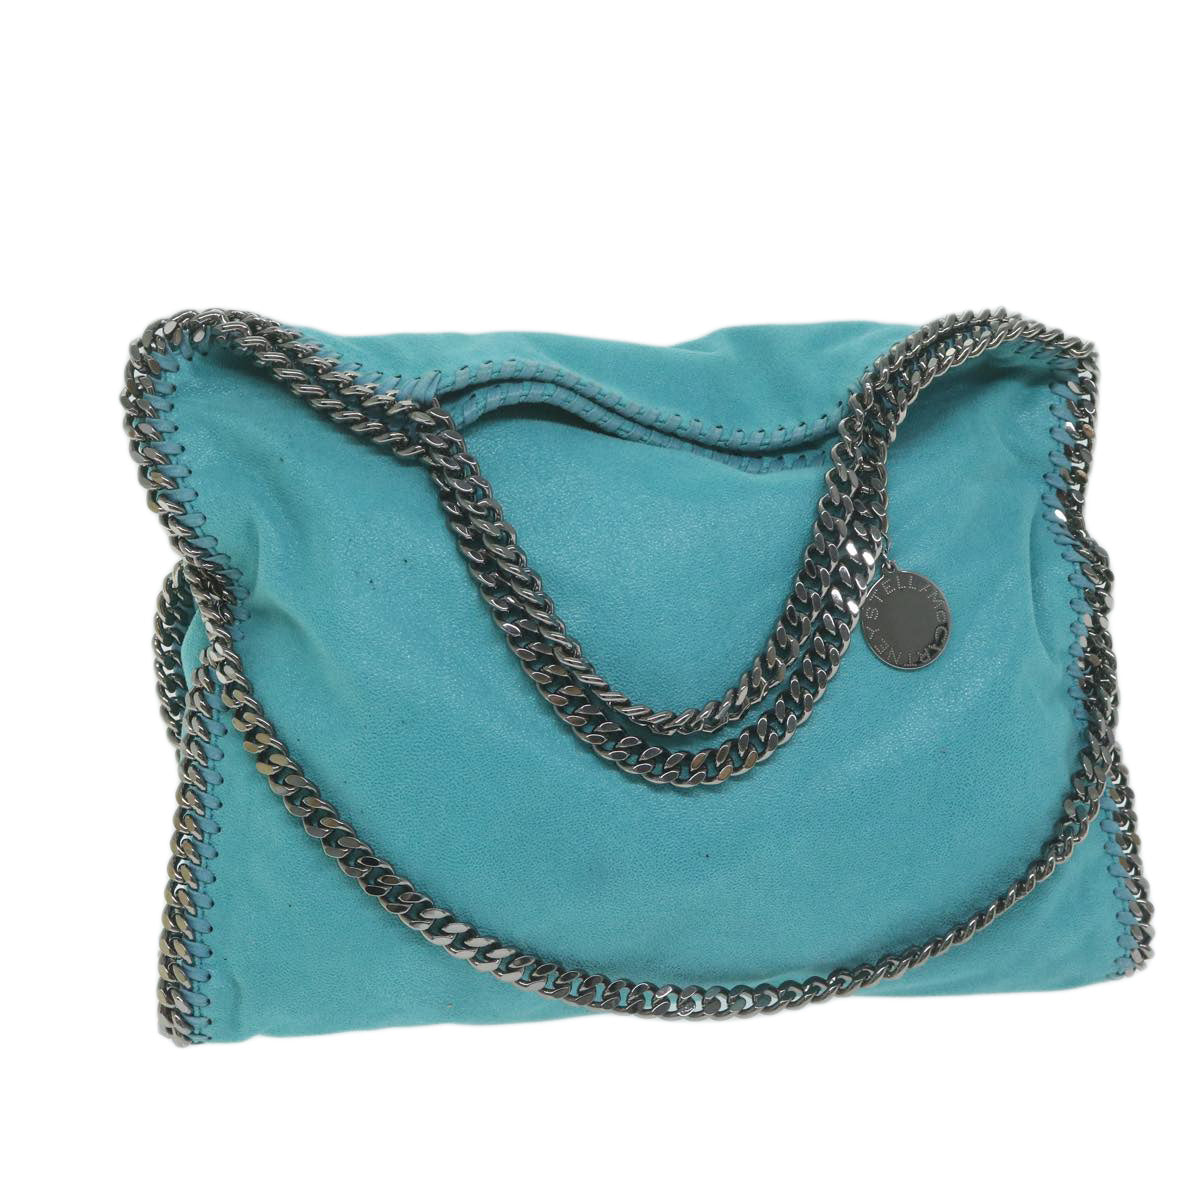 Stella MacCartney Chain Falabella Bag Polyester Turquoise Blue Auth 60808